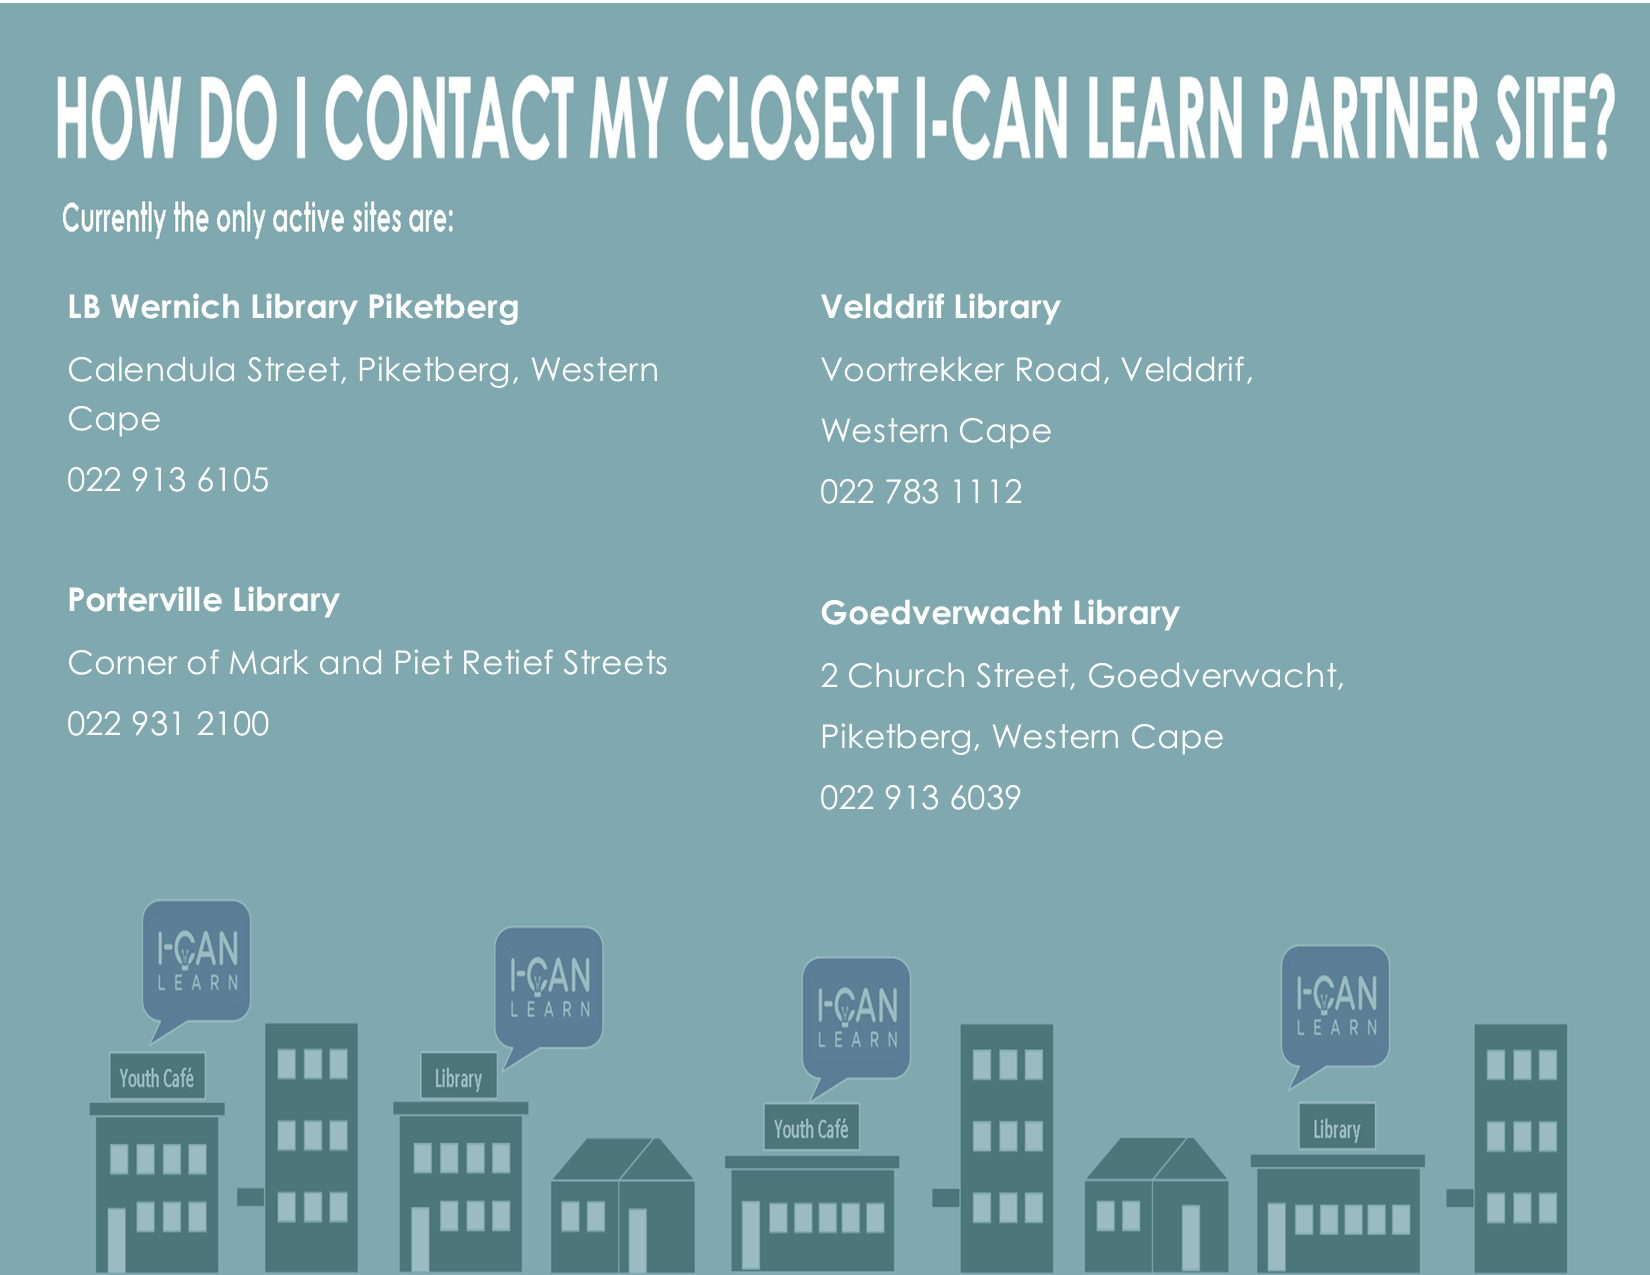 I-CAN Learn partner sites contact details